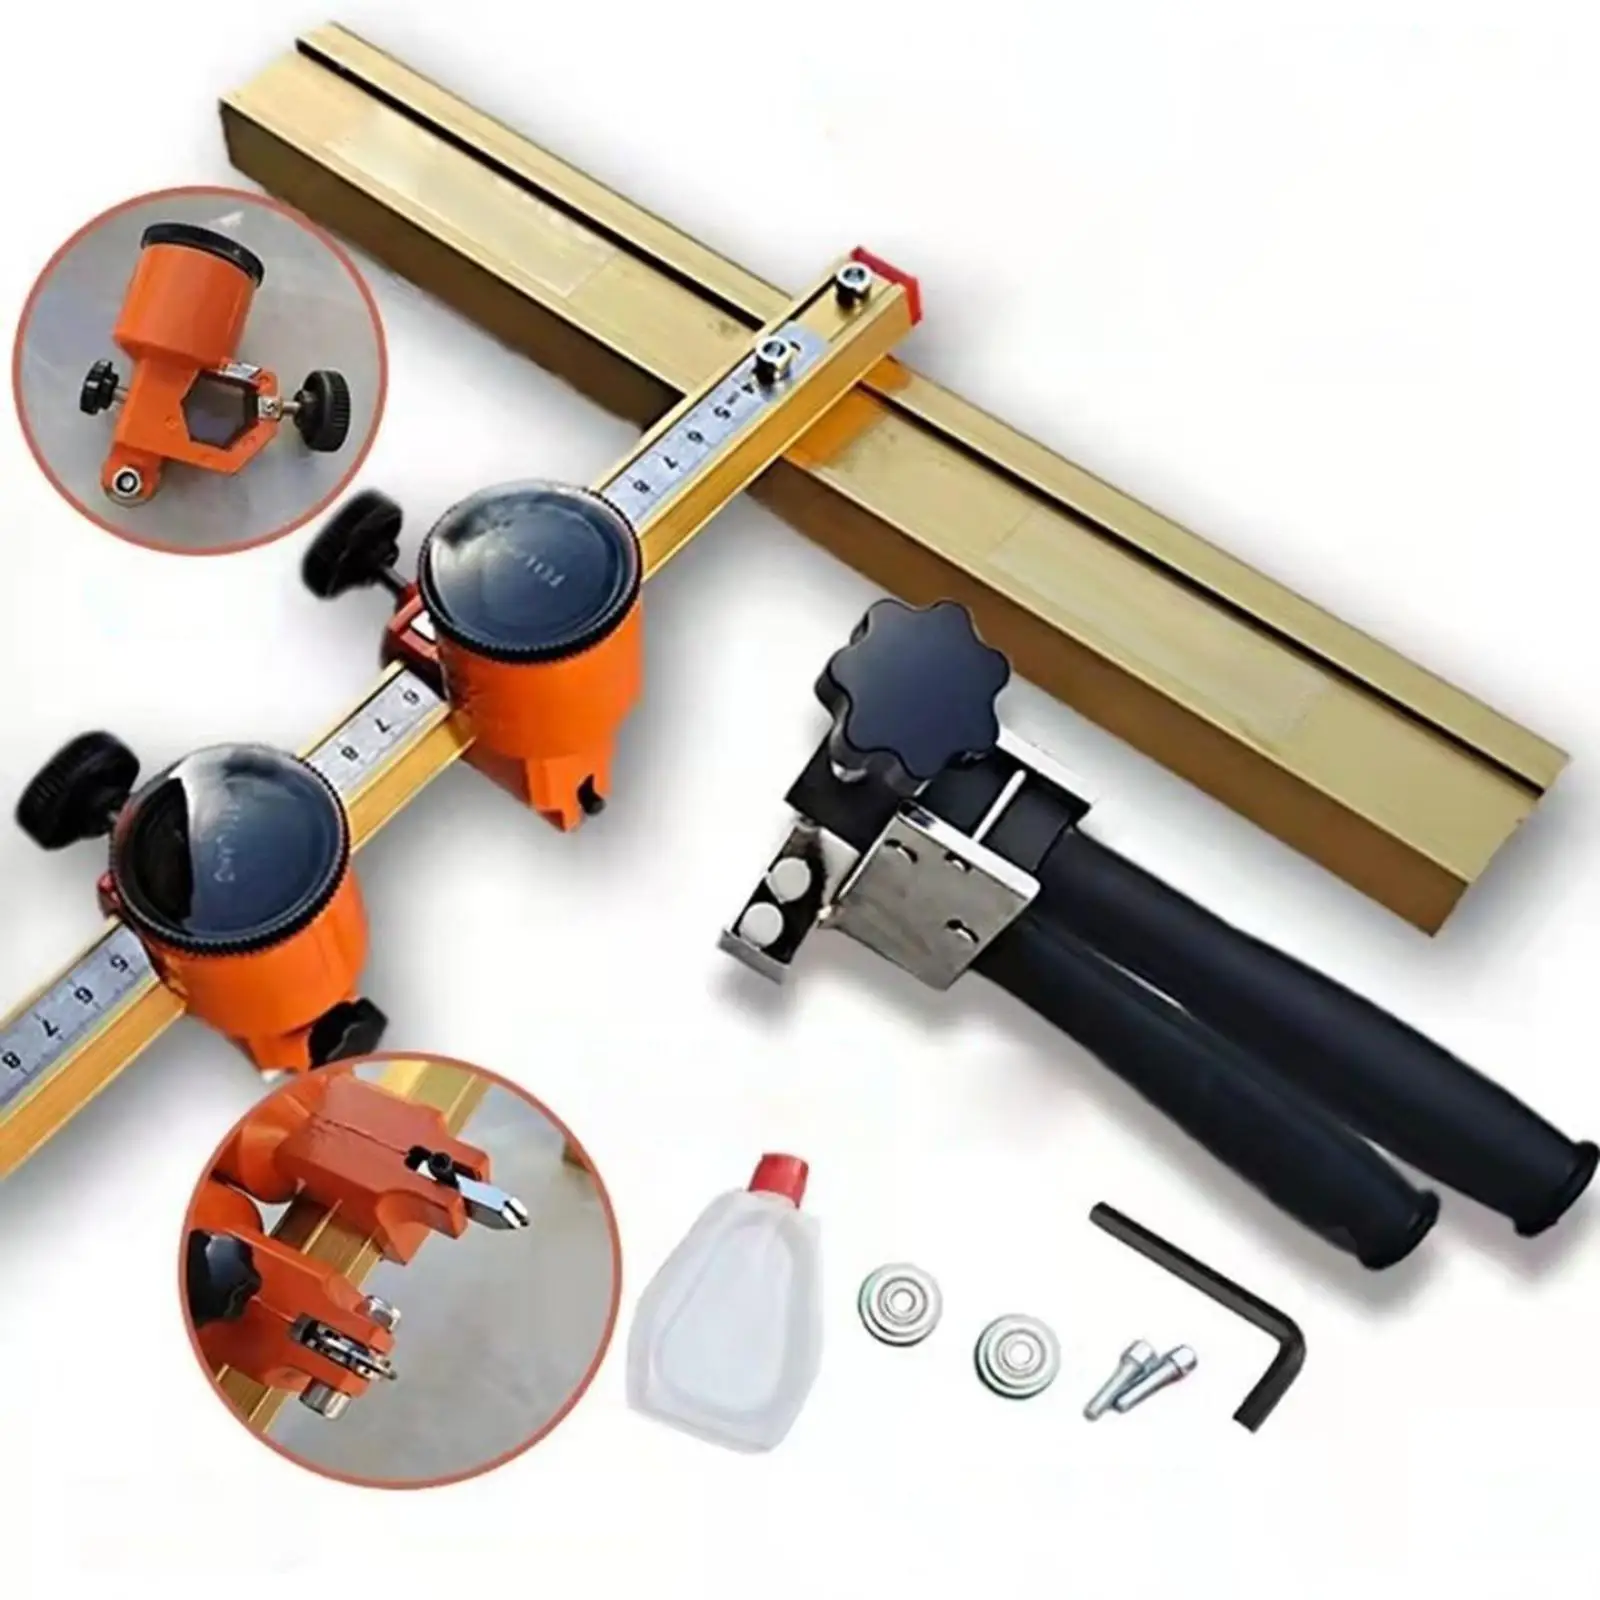 Glass Cutter Self Controlled Oiling Glass Cutting Tool Portable Glass Cutting Knife Durable Glass Tile Cutter for Tiles